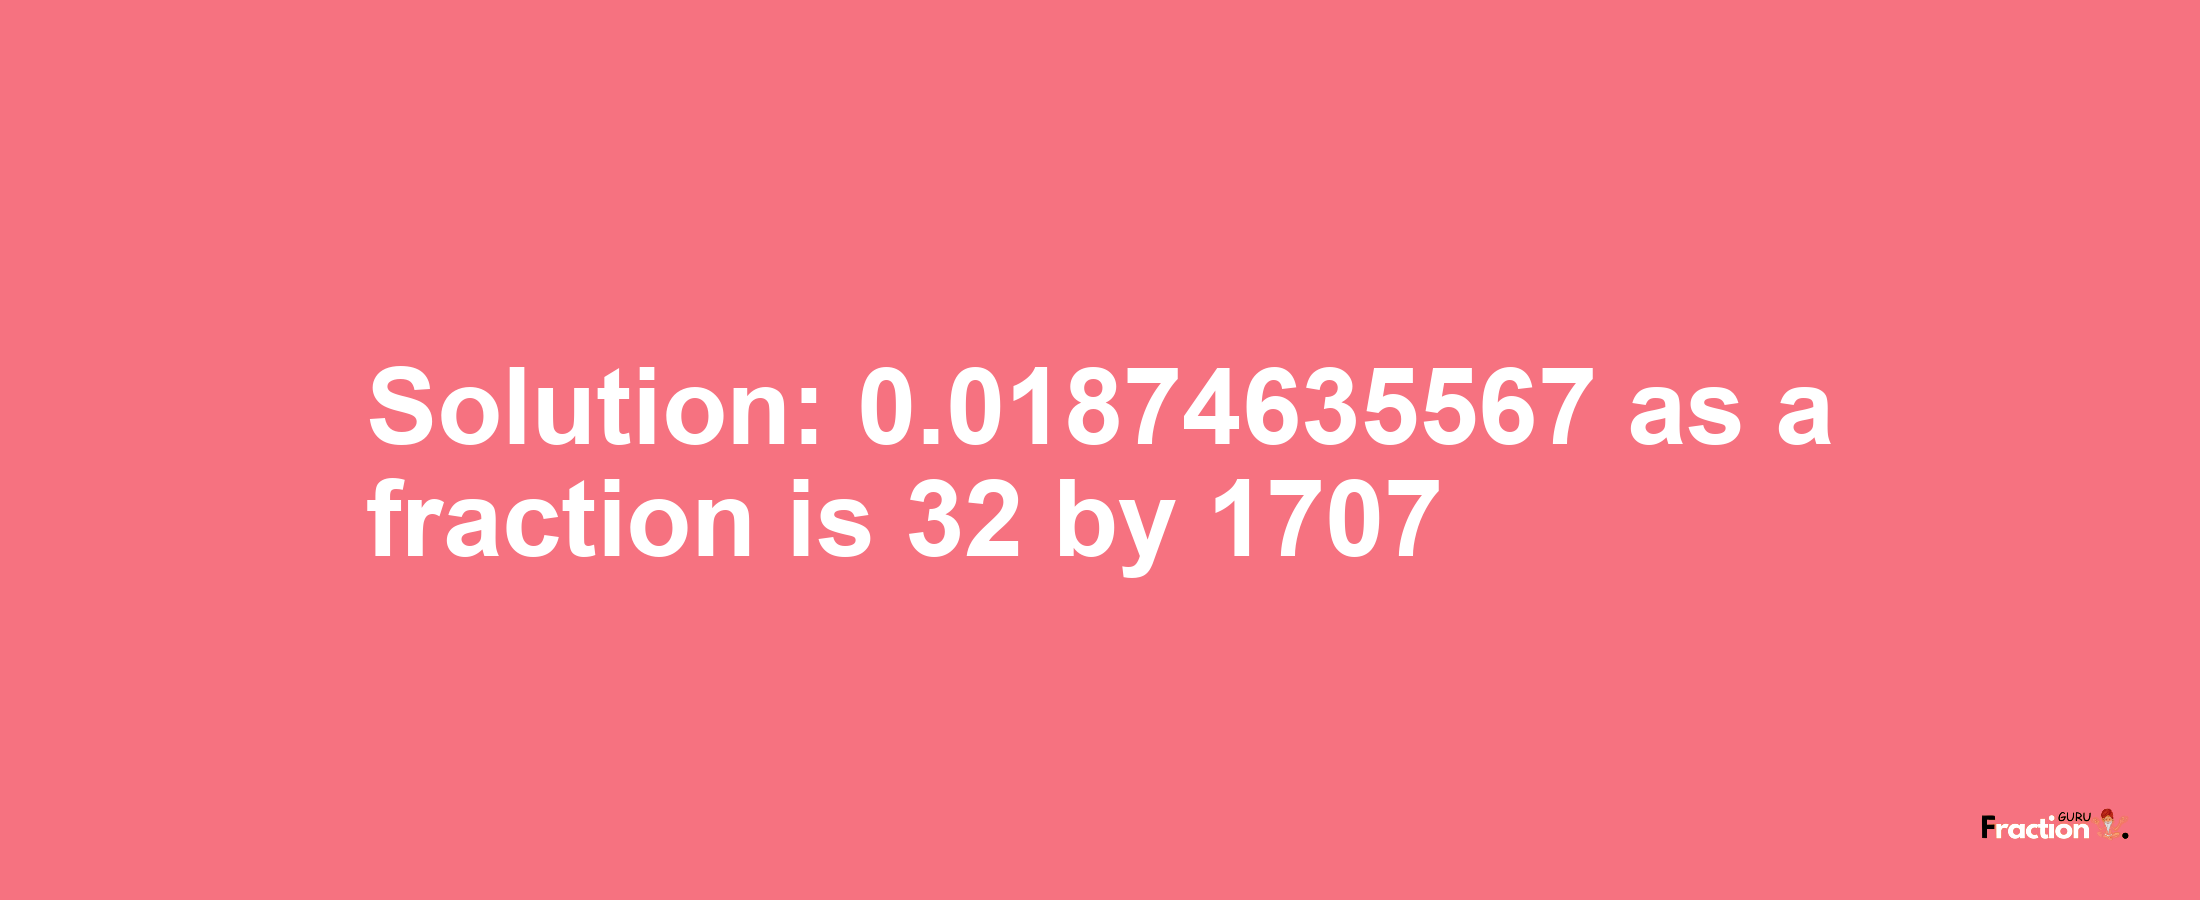 Solution:0.01874635567 as a fraction is 32/1707